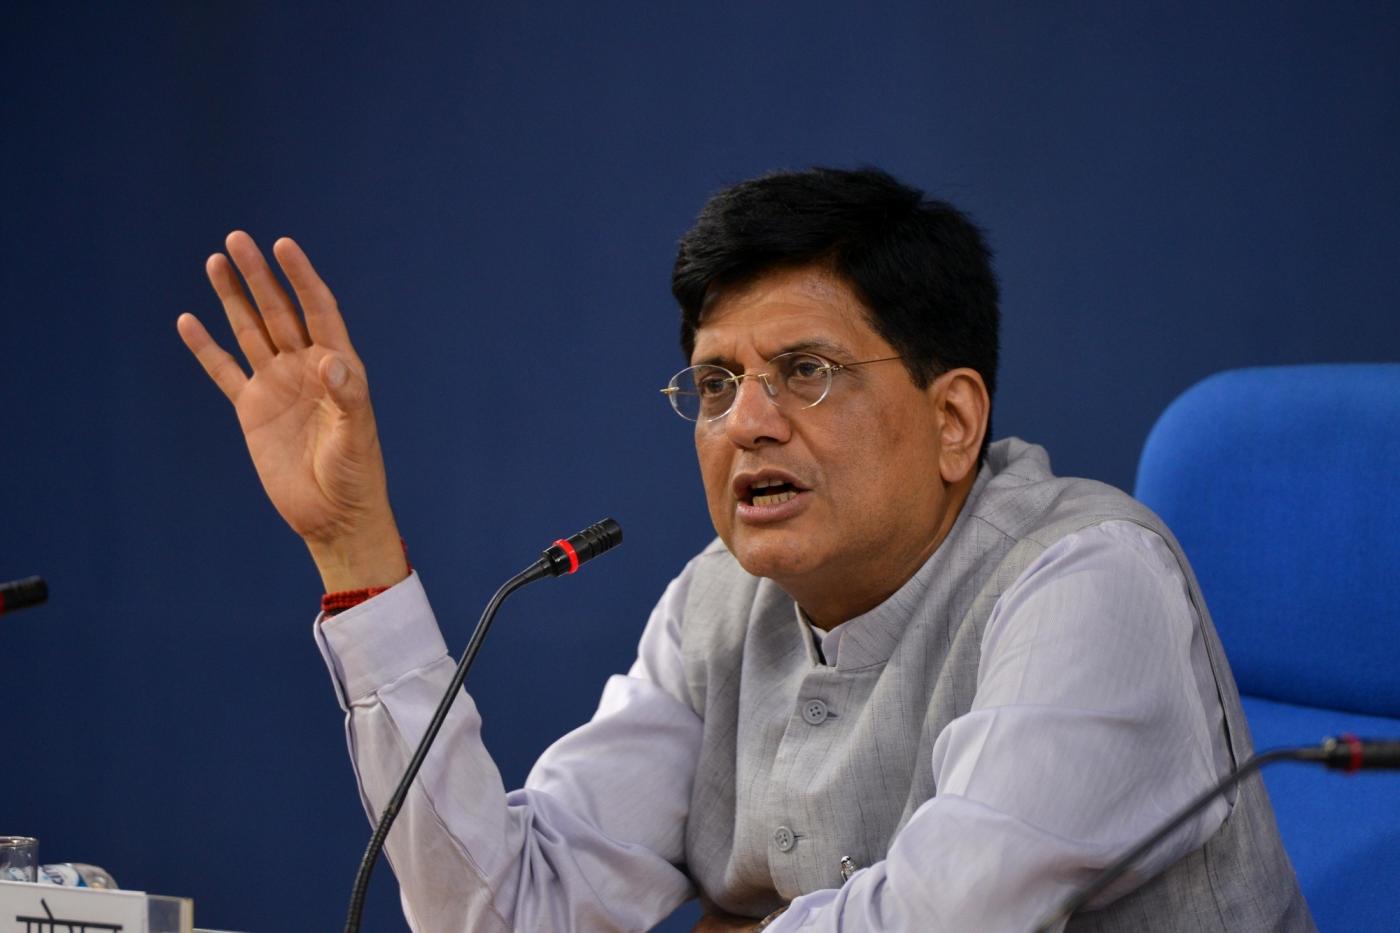 New Delhi: Union Finance and Corporate Affairs Minister Piyush Goyal addresses a press conference after chairing a cabinet meeting in New Delhi, on June 27, 2018. (Photo: IANS) by .